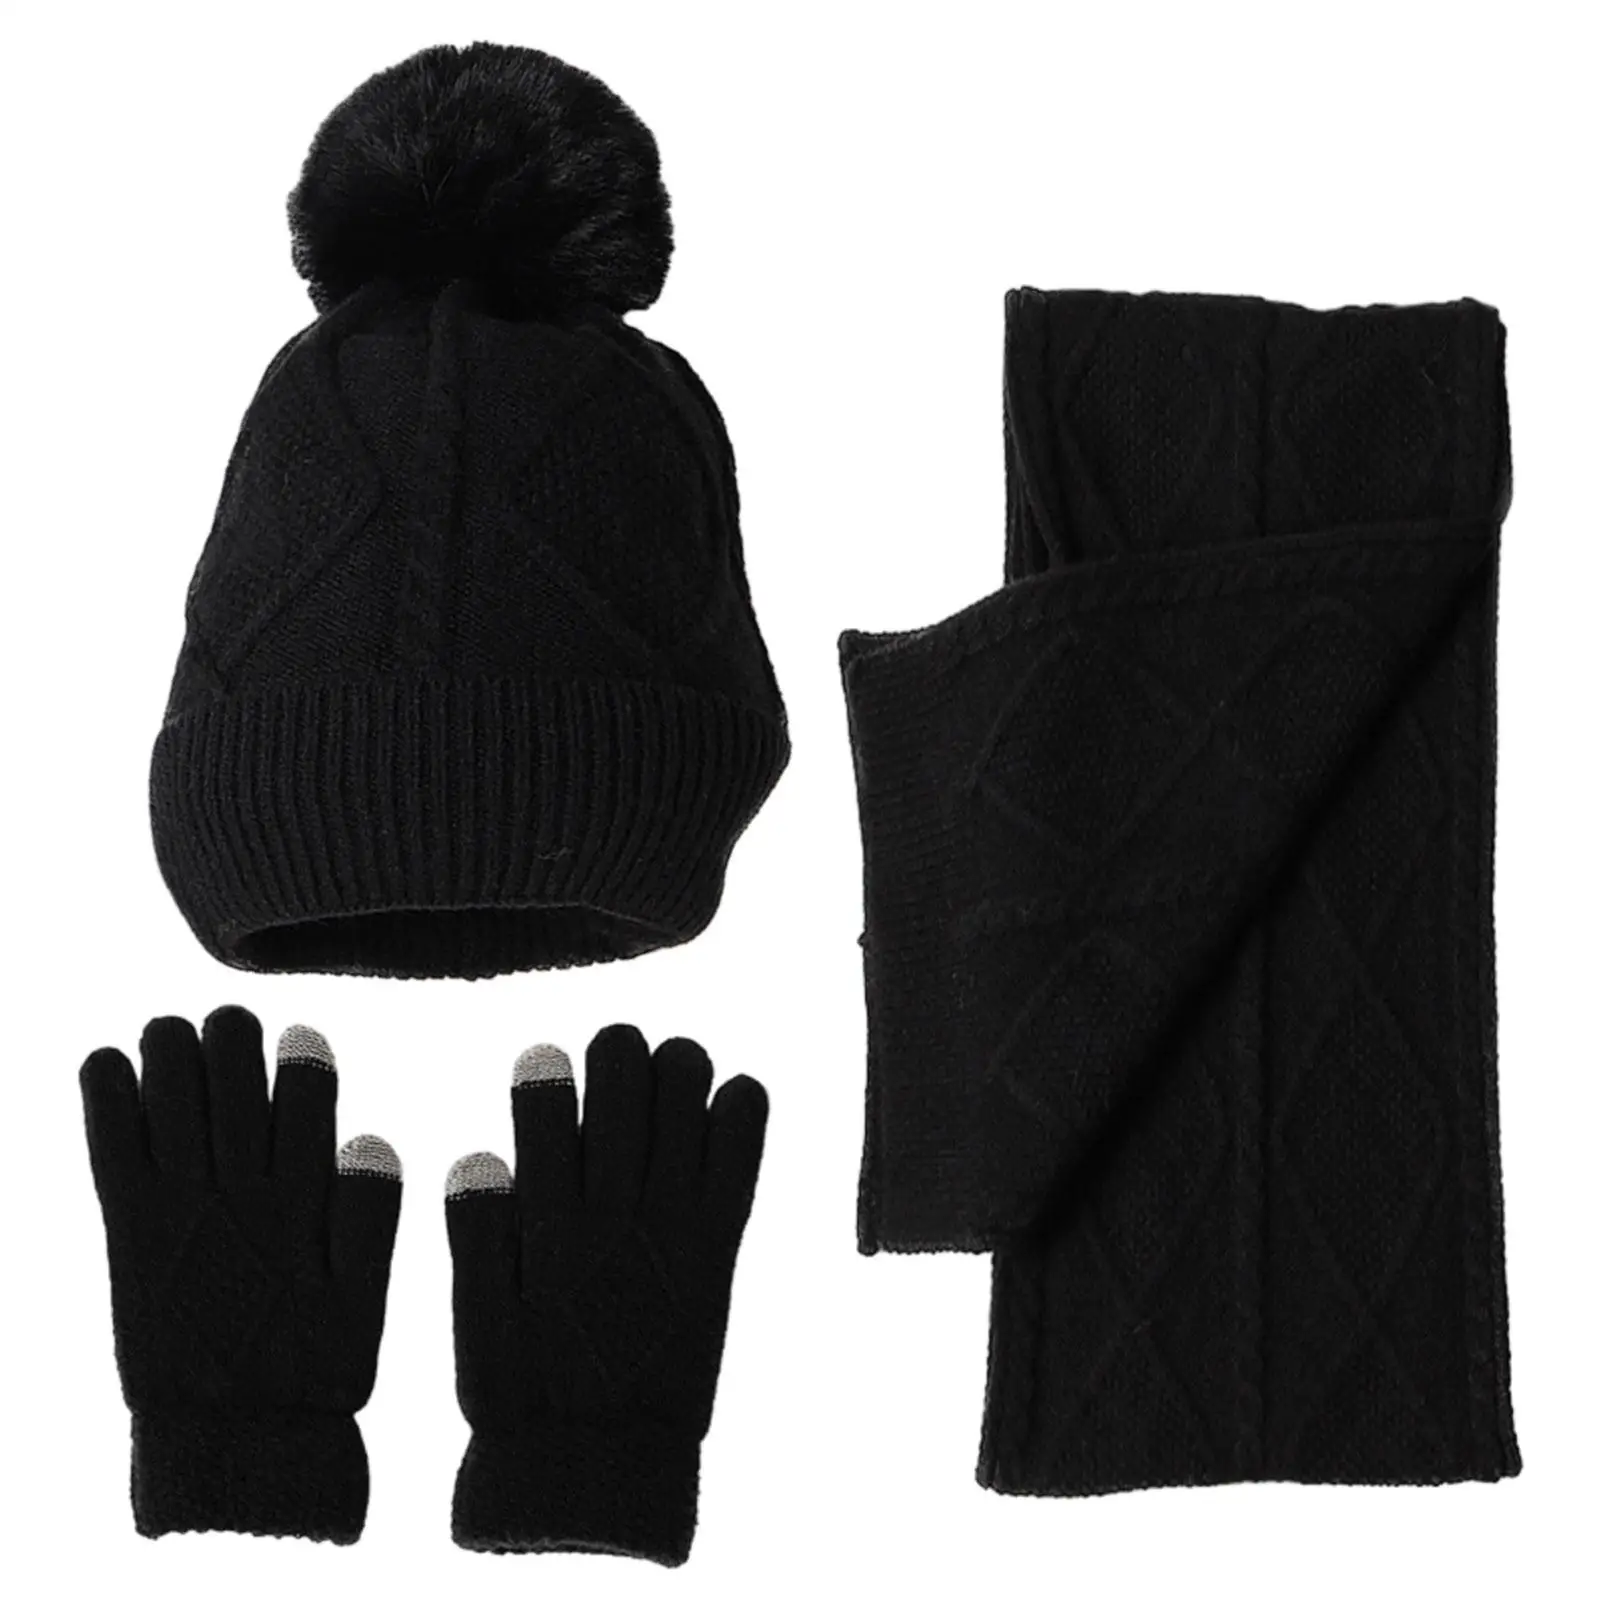 Winter Hat Scarf Gloves Winter Cold Cap for Cold Weather Adults Cap Beanie for Outdoor Sports Skiing Hiking Fishing Holiday